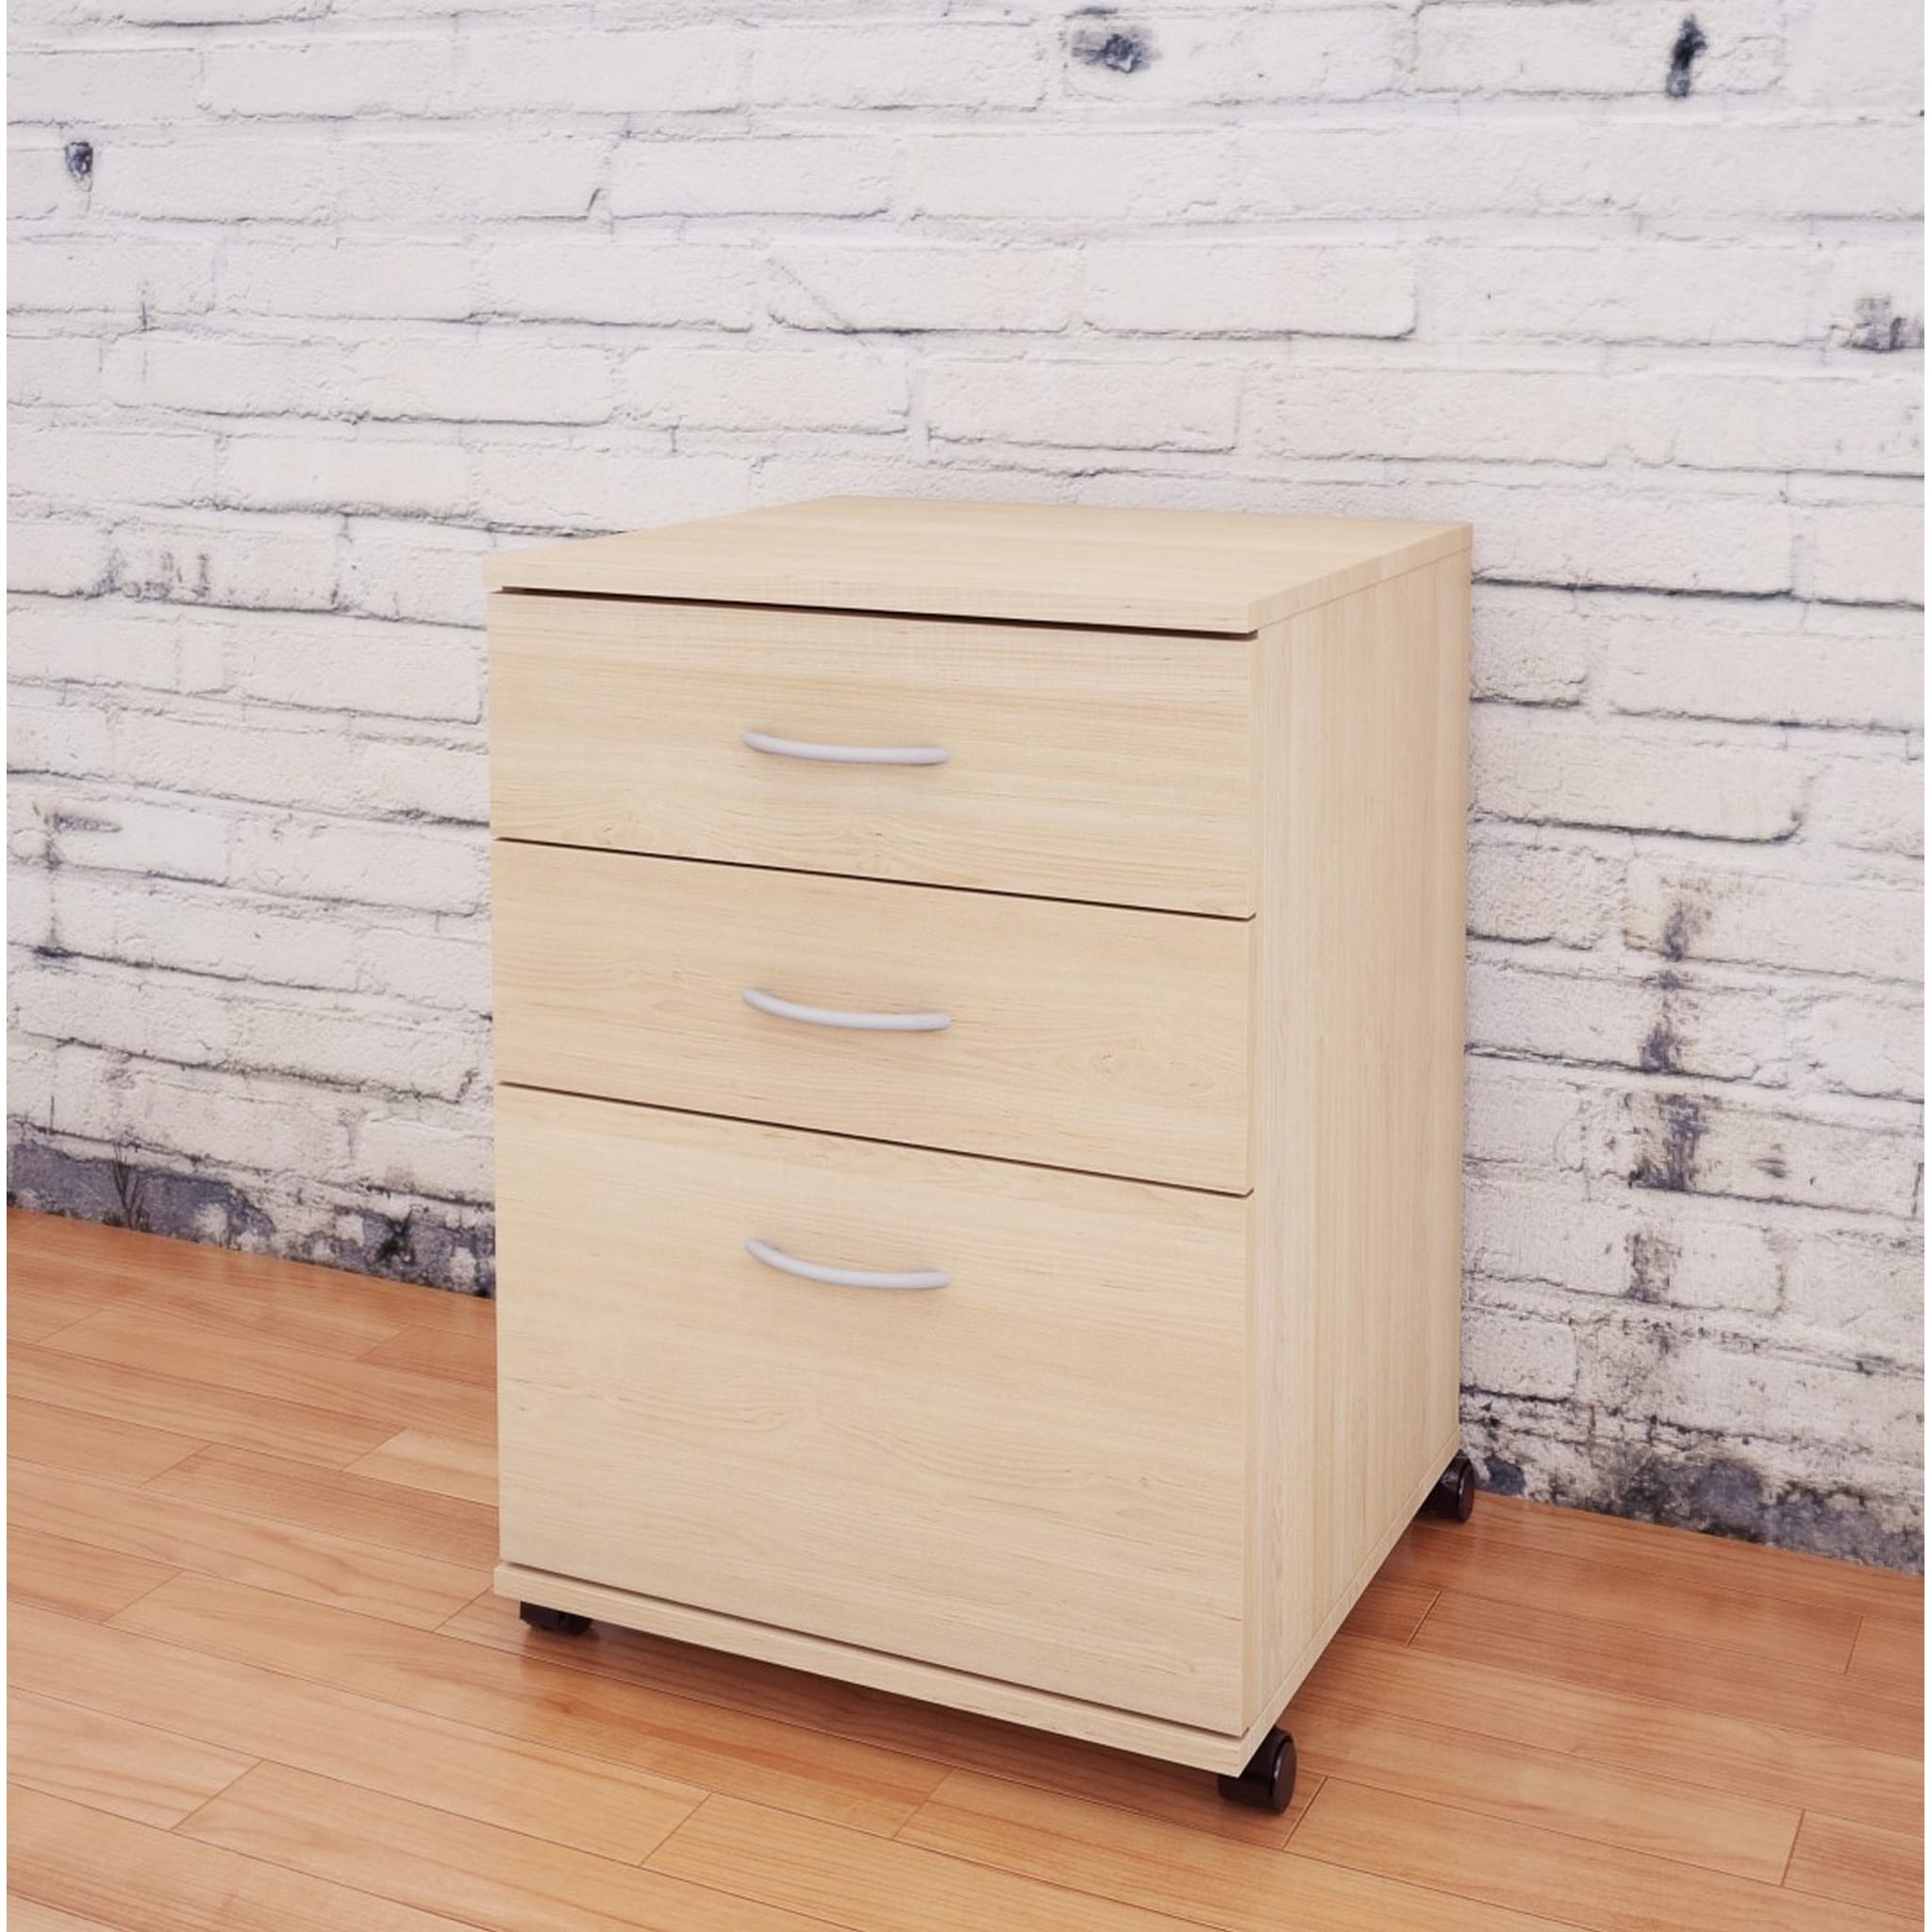 https://ak1.ostkcdn.com/images/products/is/images/direct/288c78e7a15723ba61b55d43cde0704a7f1a1e19/Nexera-Essentials-Mobile-Filing-Cabinet%2C-Natural-Maple.jpg